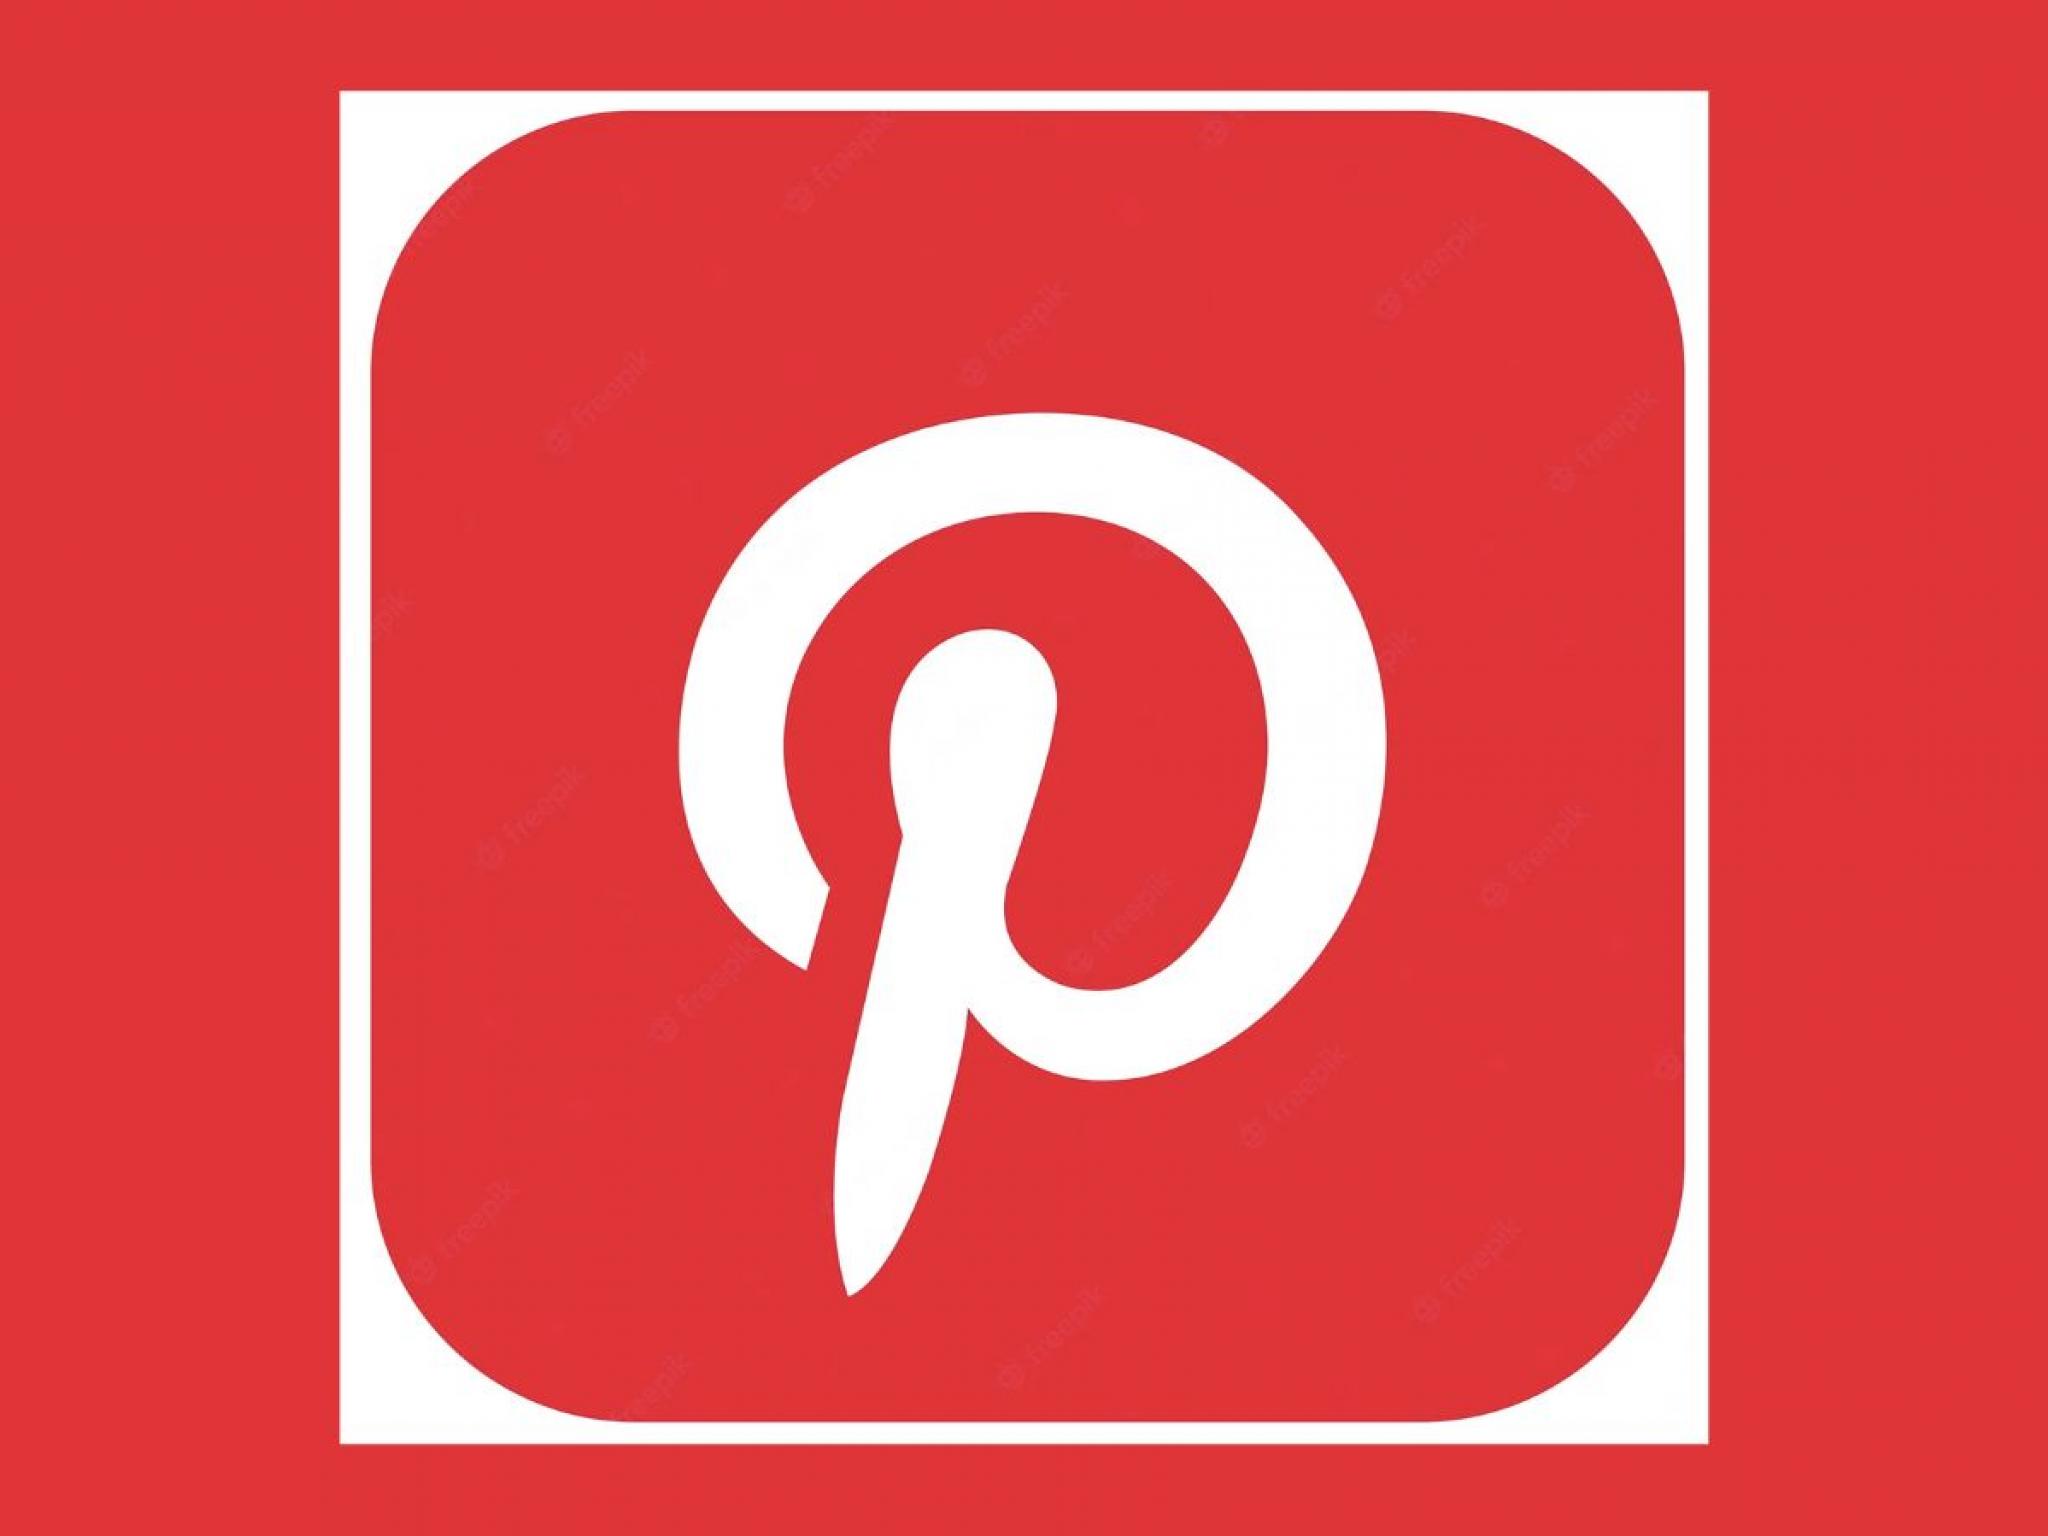  pinterest-to-rally-over-20-here-are-10-top-analyst-forecasts-for-monday 